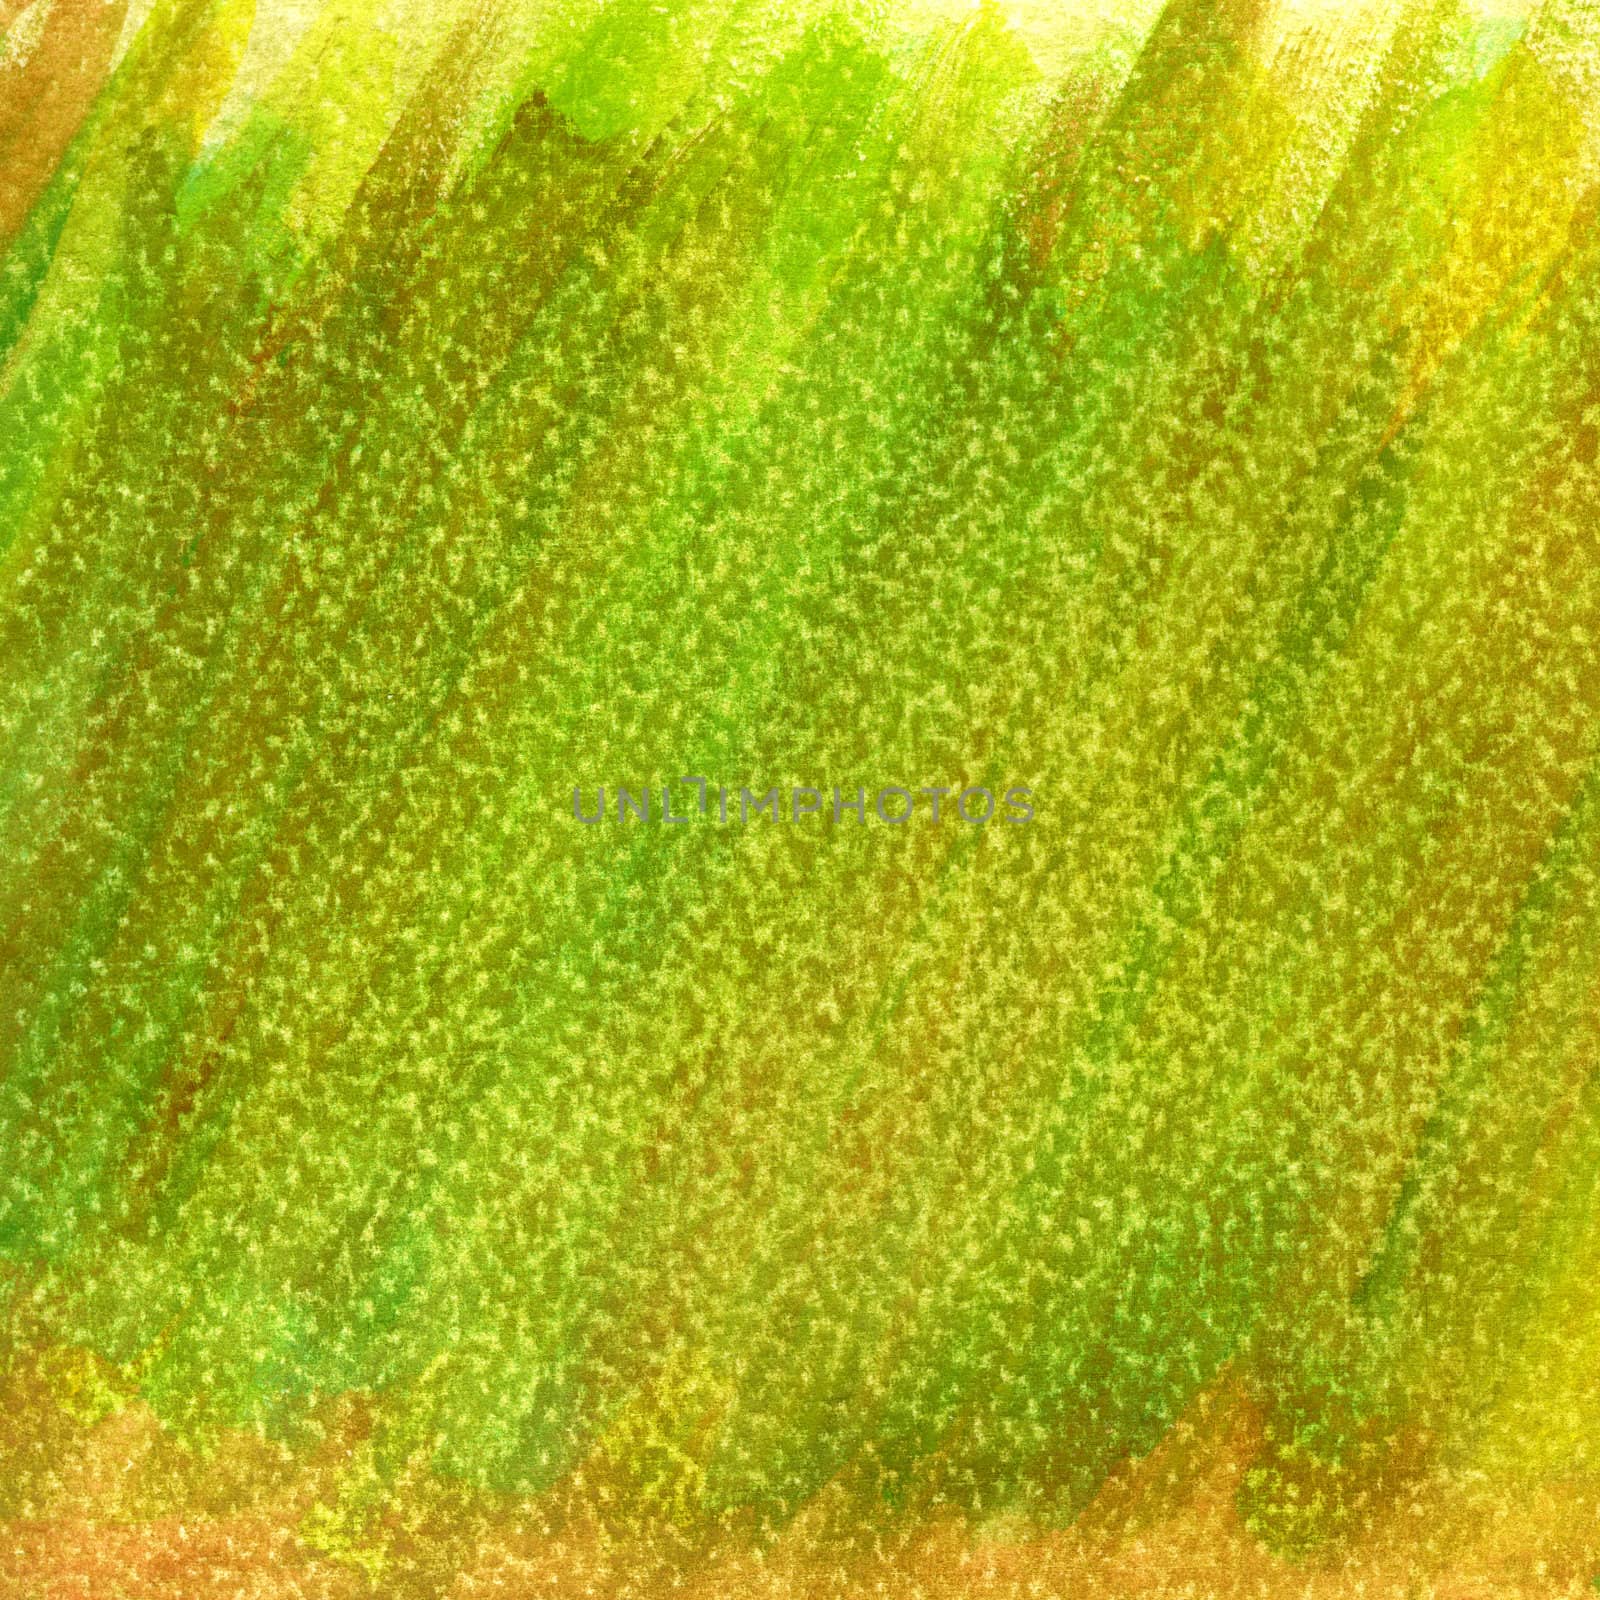 green and yellow patchy grunge painted and scratched abstract ba by PixelsAway